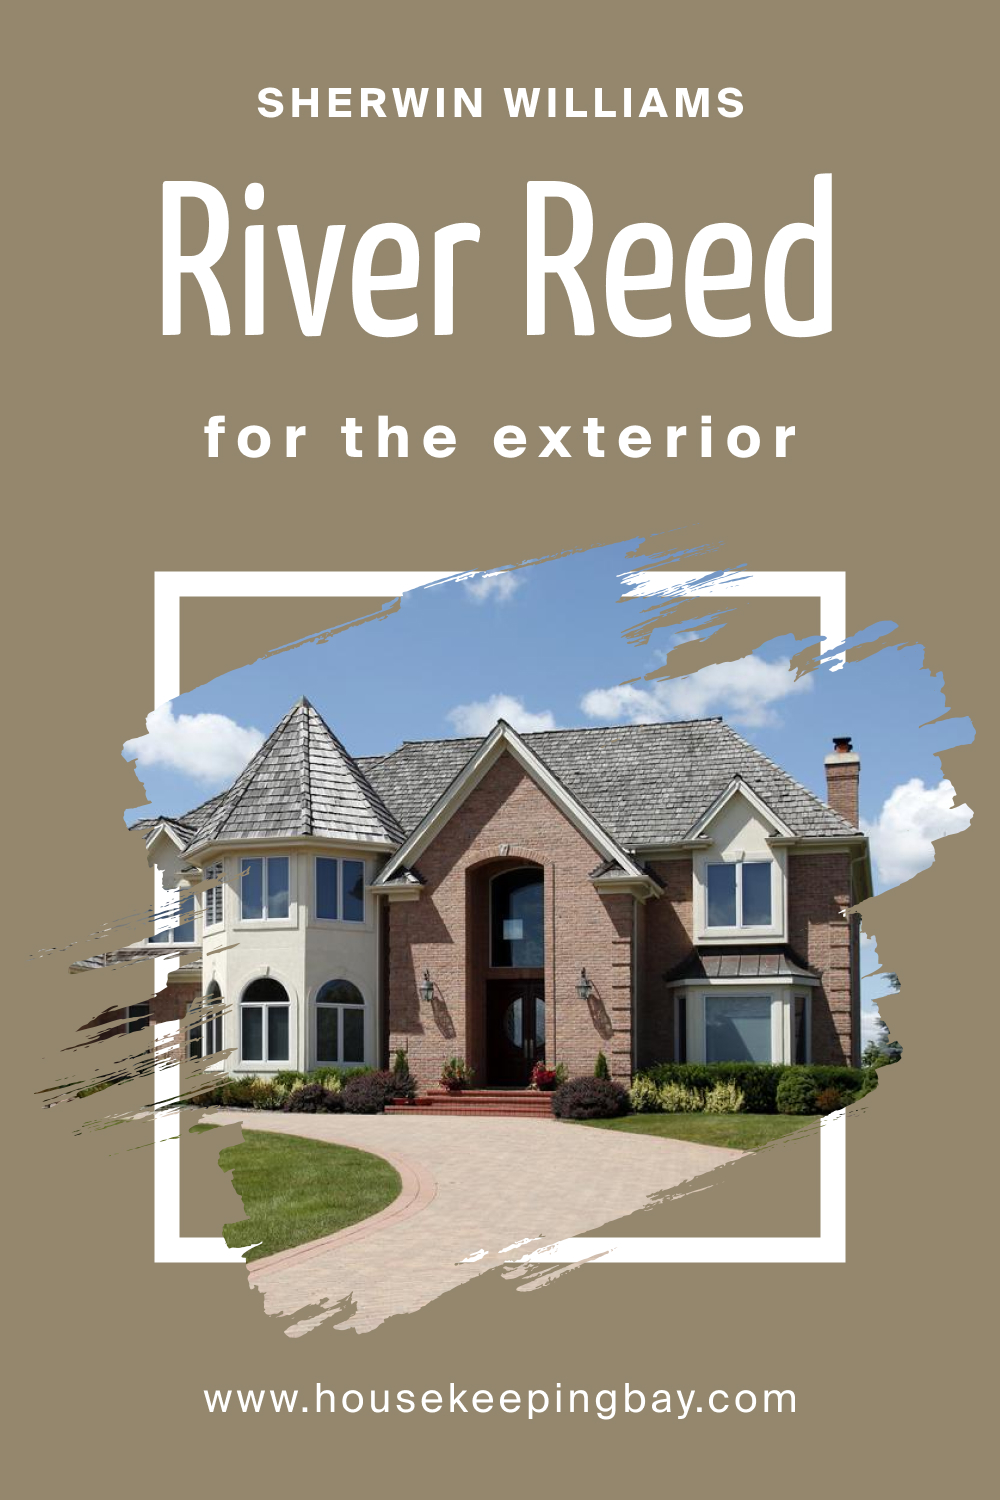 Sherwin Williams. SW 9534 River Reed For the exterior